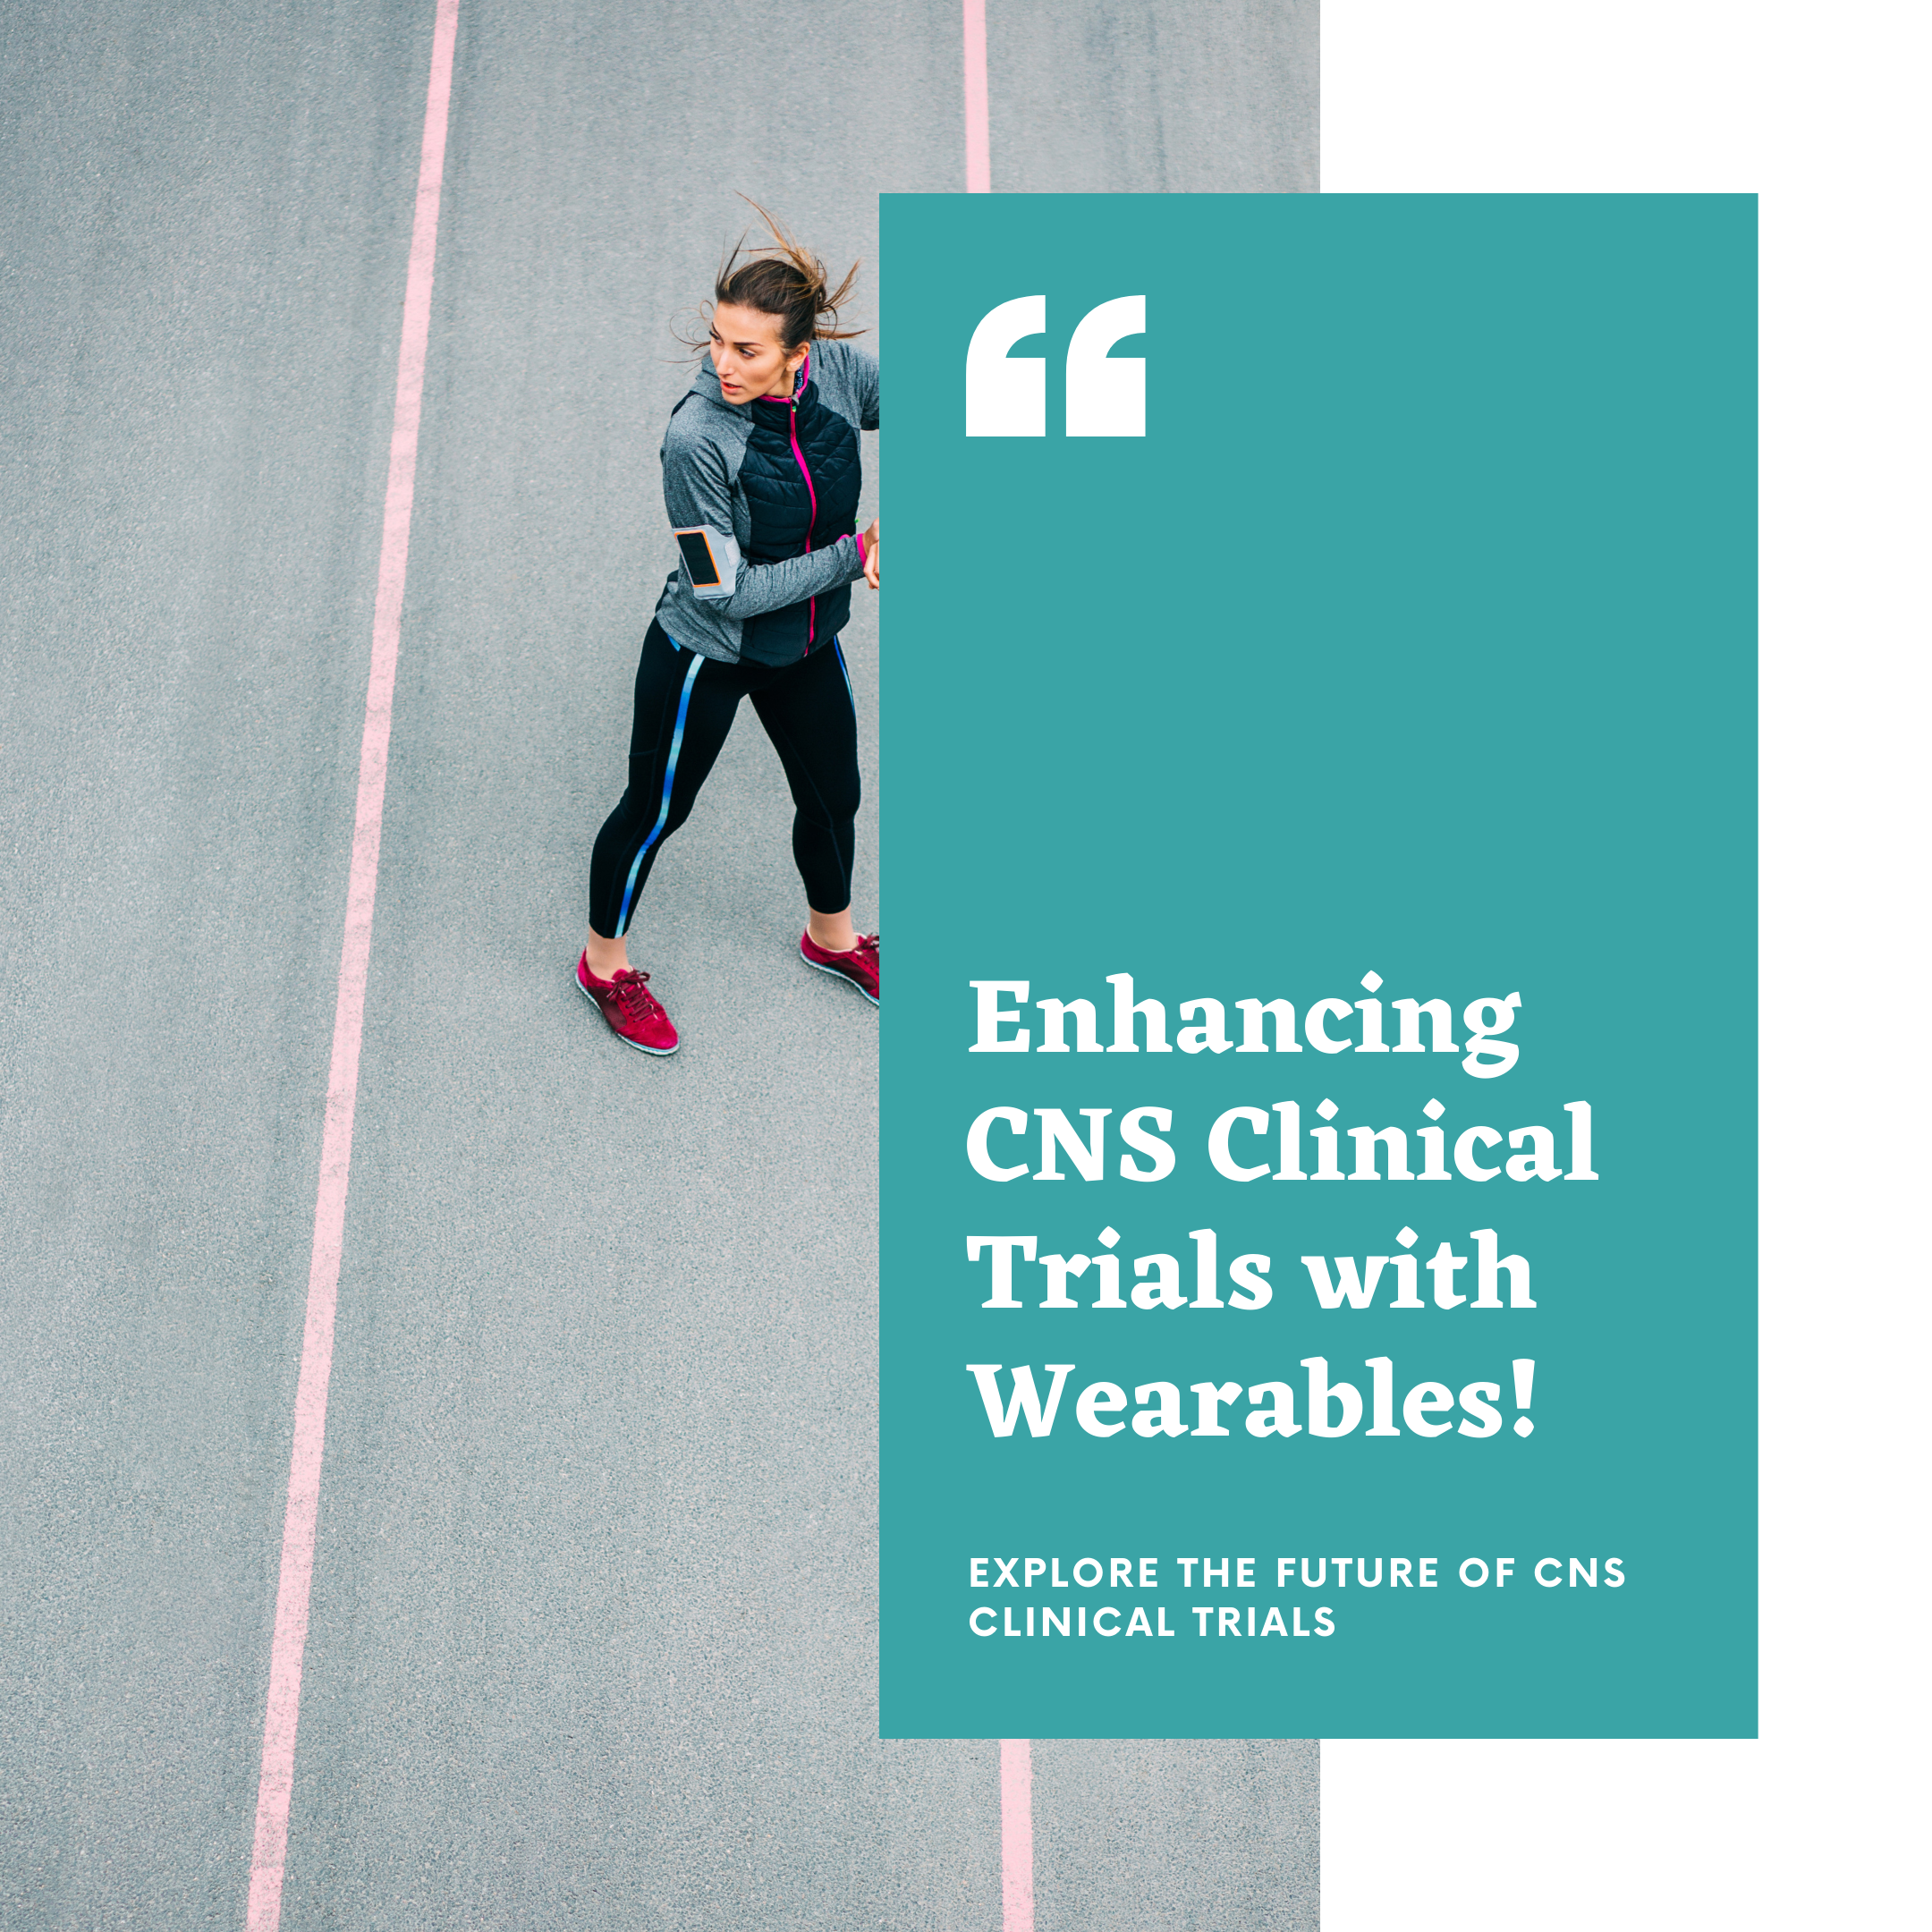 Wearables in CNS clinical trials - devices enhancing clinical research through real-time data collection and patient monitoring.